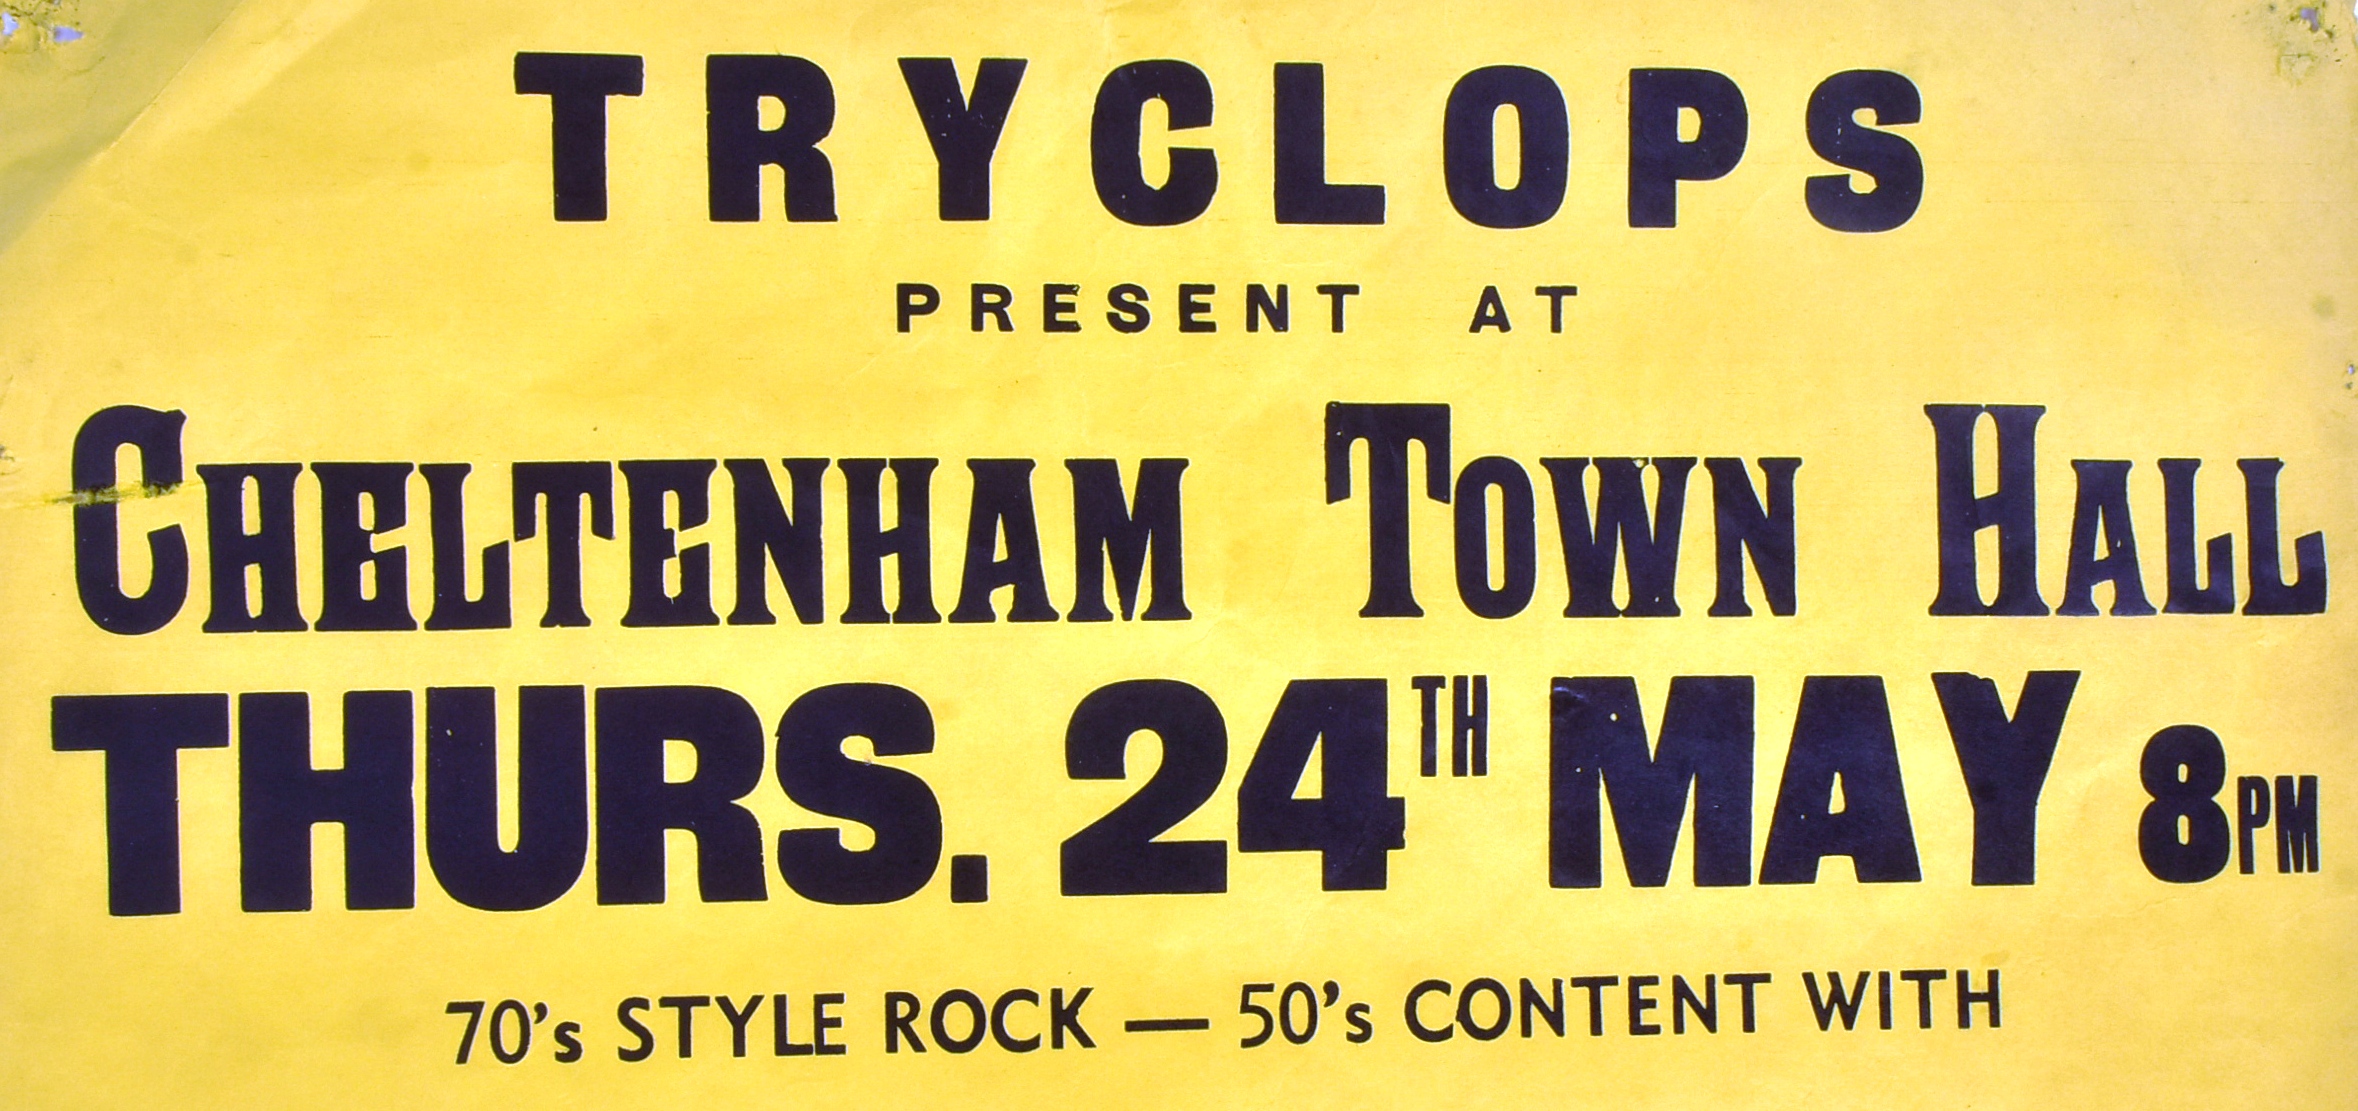 ROY WOOD'S WIZZARD - VINTAGE POSTER FROM CHELTENHAM TOWN HALL - Image 2 of 4